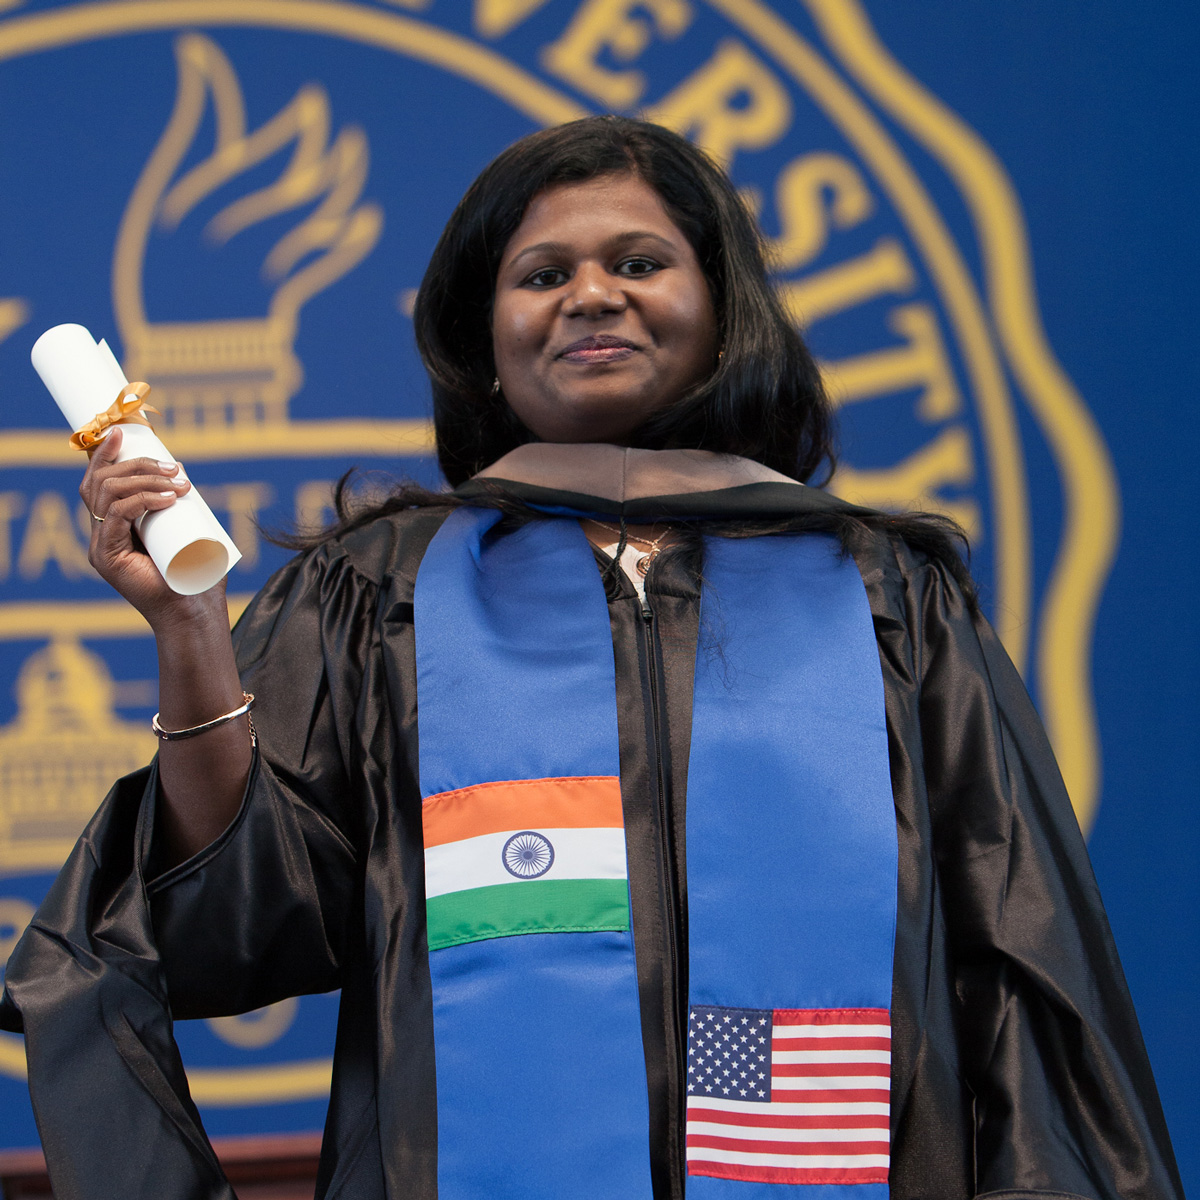 Annapoorani holding her scroll at her Commencement ceremony.